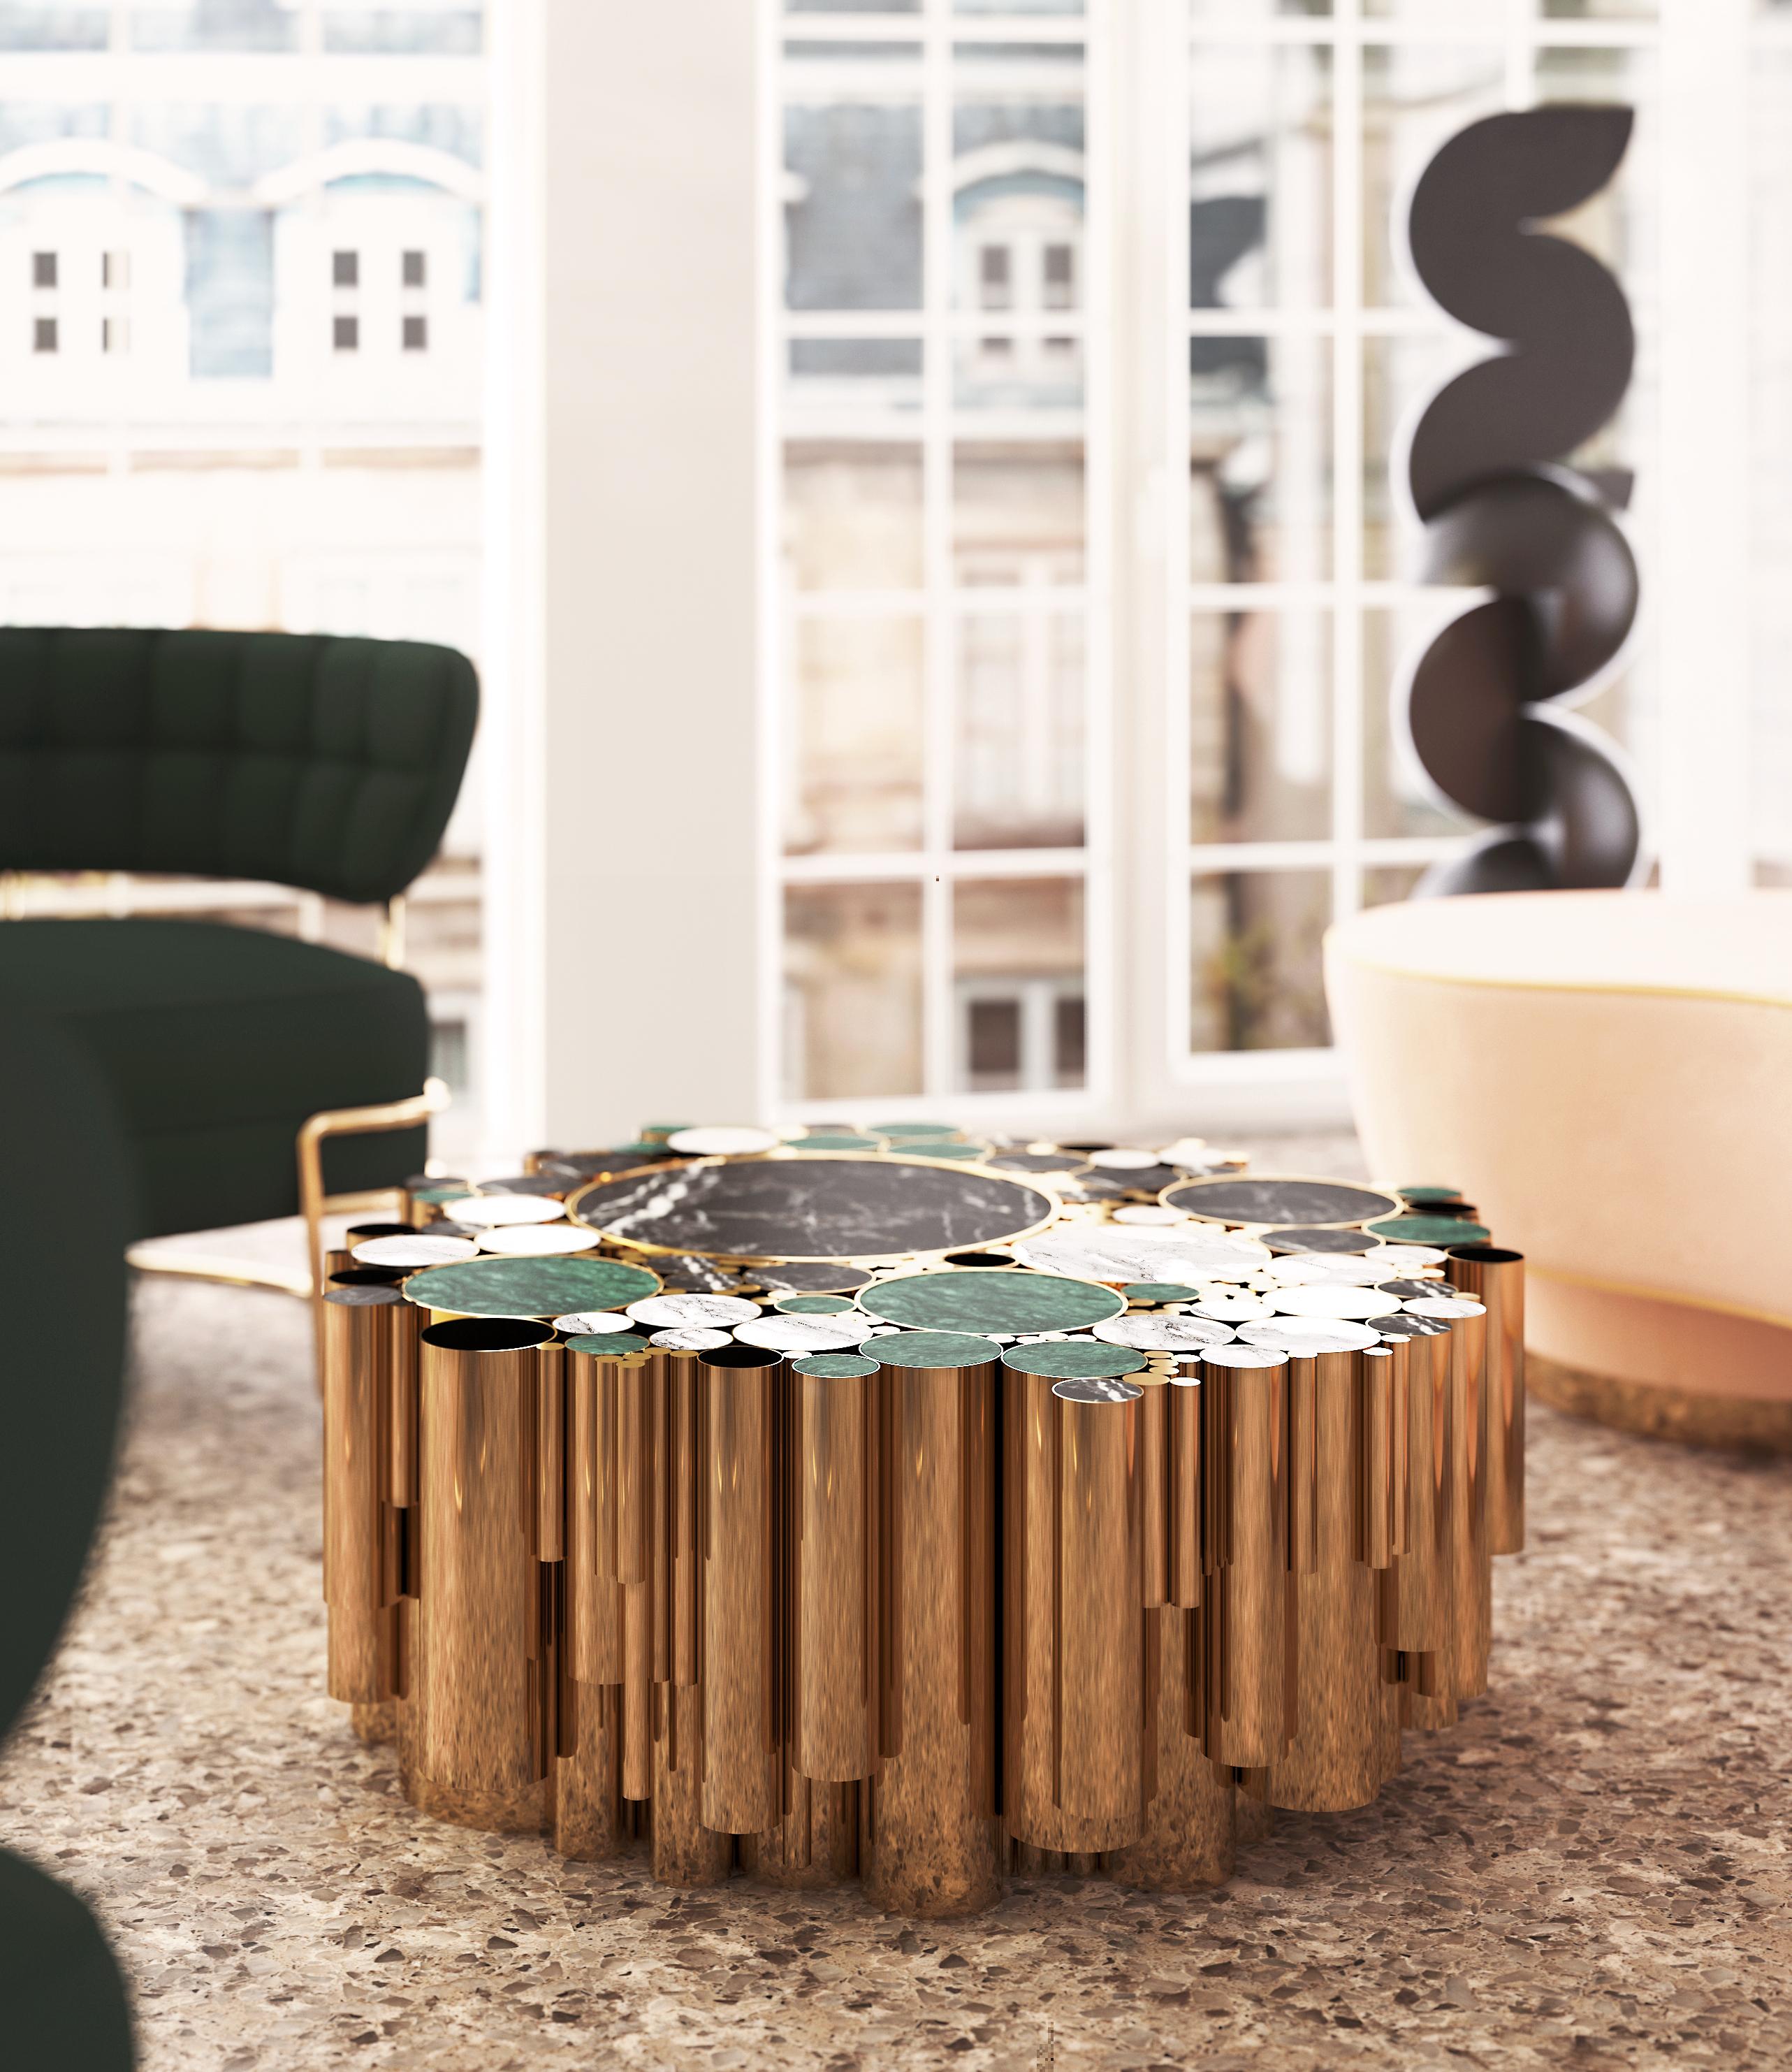 Wanderlust center table is one of the Malabar's bestsellers.
Suppose design office, an interior architecture studio, located in Hiroshima, Japan, once created a project that brought wilderness into an urbanistic environment. By distributing a huge